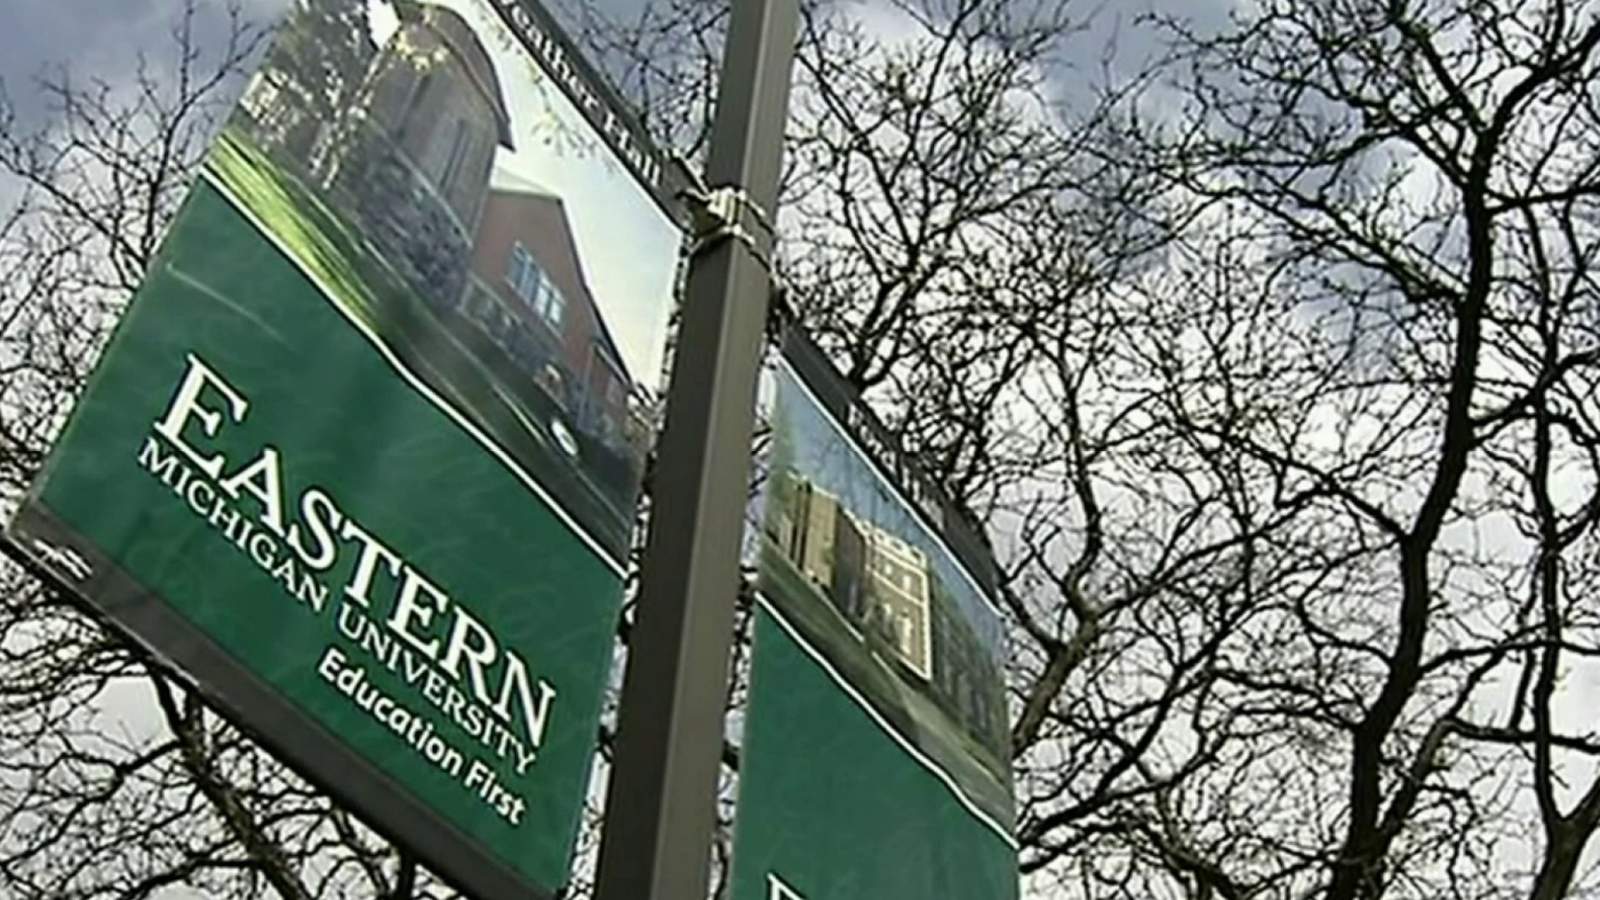 Lawsuit: Eastern Michigan University ‘turned a blind eye’ to reports of sexual assault